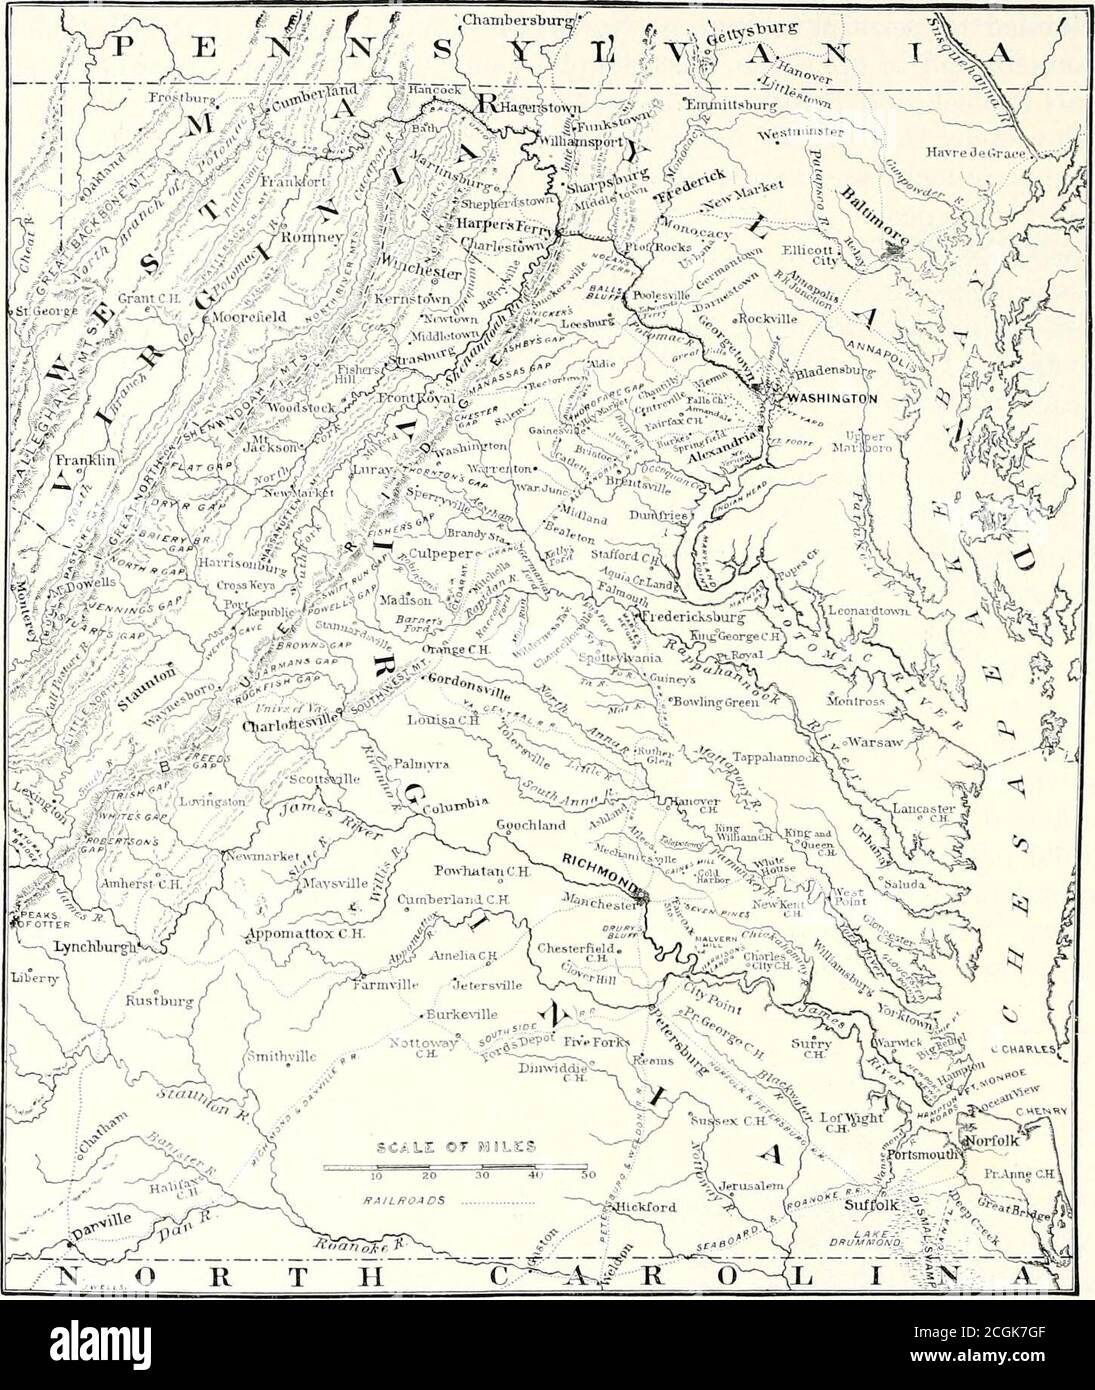 . Battles and leaders of the Civil War : being for the most part contributions by Union and Confederate officers . HEADQUAKTERS OF BRIGADIER-GENERAL JOHN SEDGWICK, ON THE LEESBURG TURNPIKE, NEAR WASHINGTON. FROM A SKETCH MADE IN JANUART, 1862. 164 THE PENINSULAR. CAMPAIGN.. MAP OF THE VIRGINIA CAMPAIGNS. him, even for the transaction of ordinary current business, and our personalrelations at once ceased. The impatience of the Executive immediatelybecame extreme, and I can attribute it only to the influence of the newSecretary, who did many things to break up the free and confidential inter-cou Stock Photo